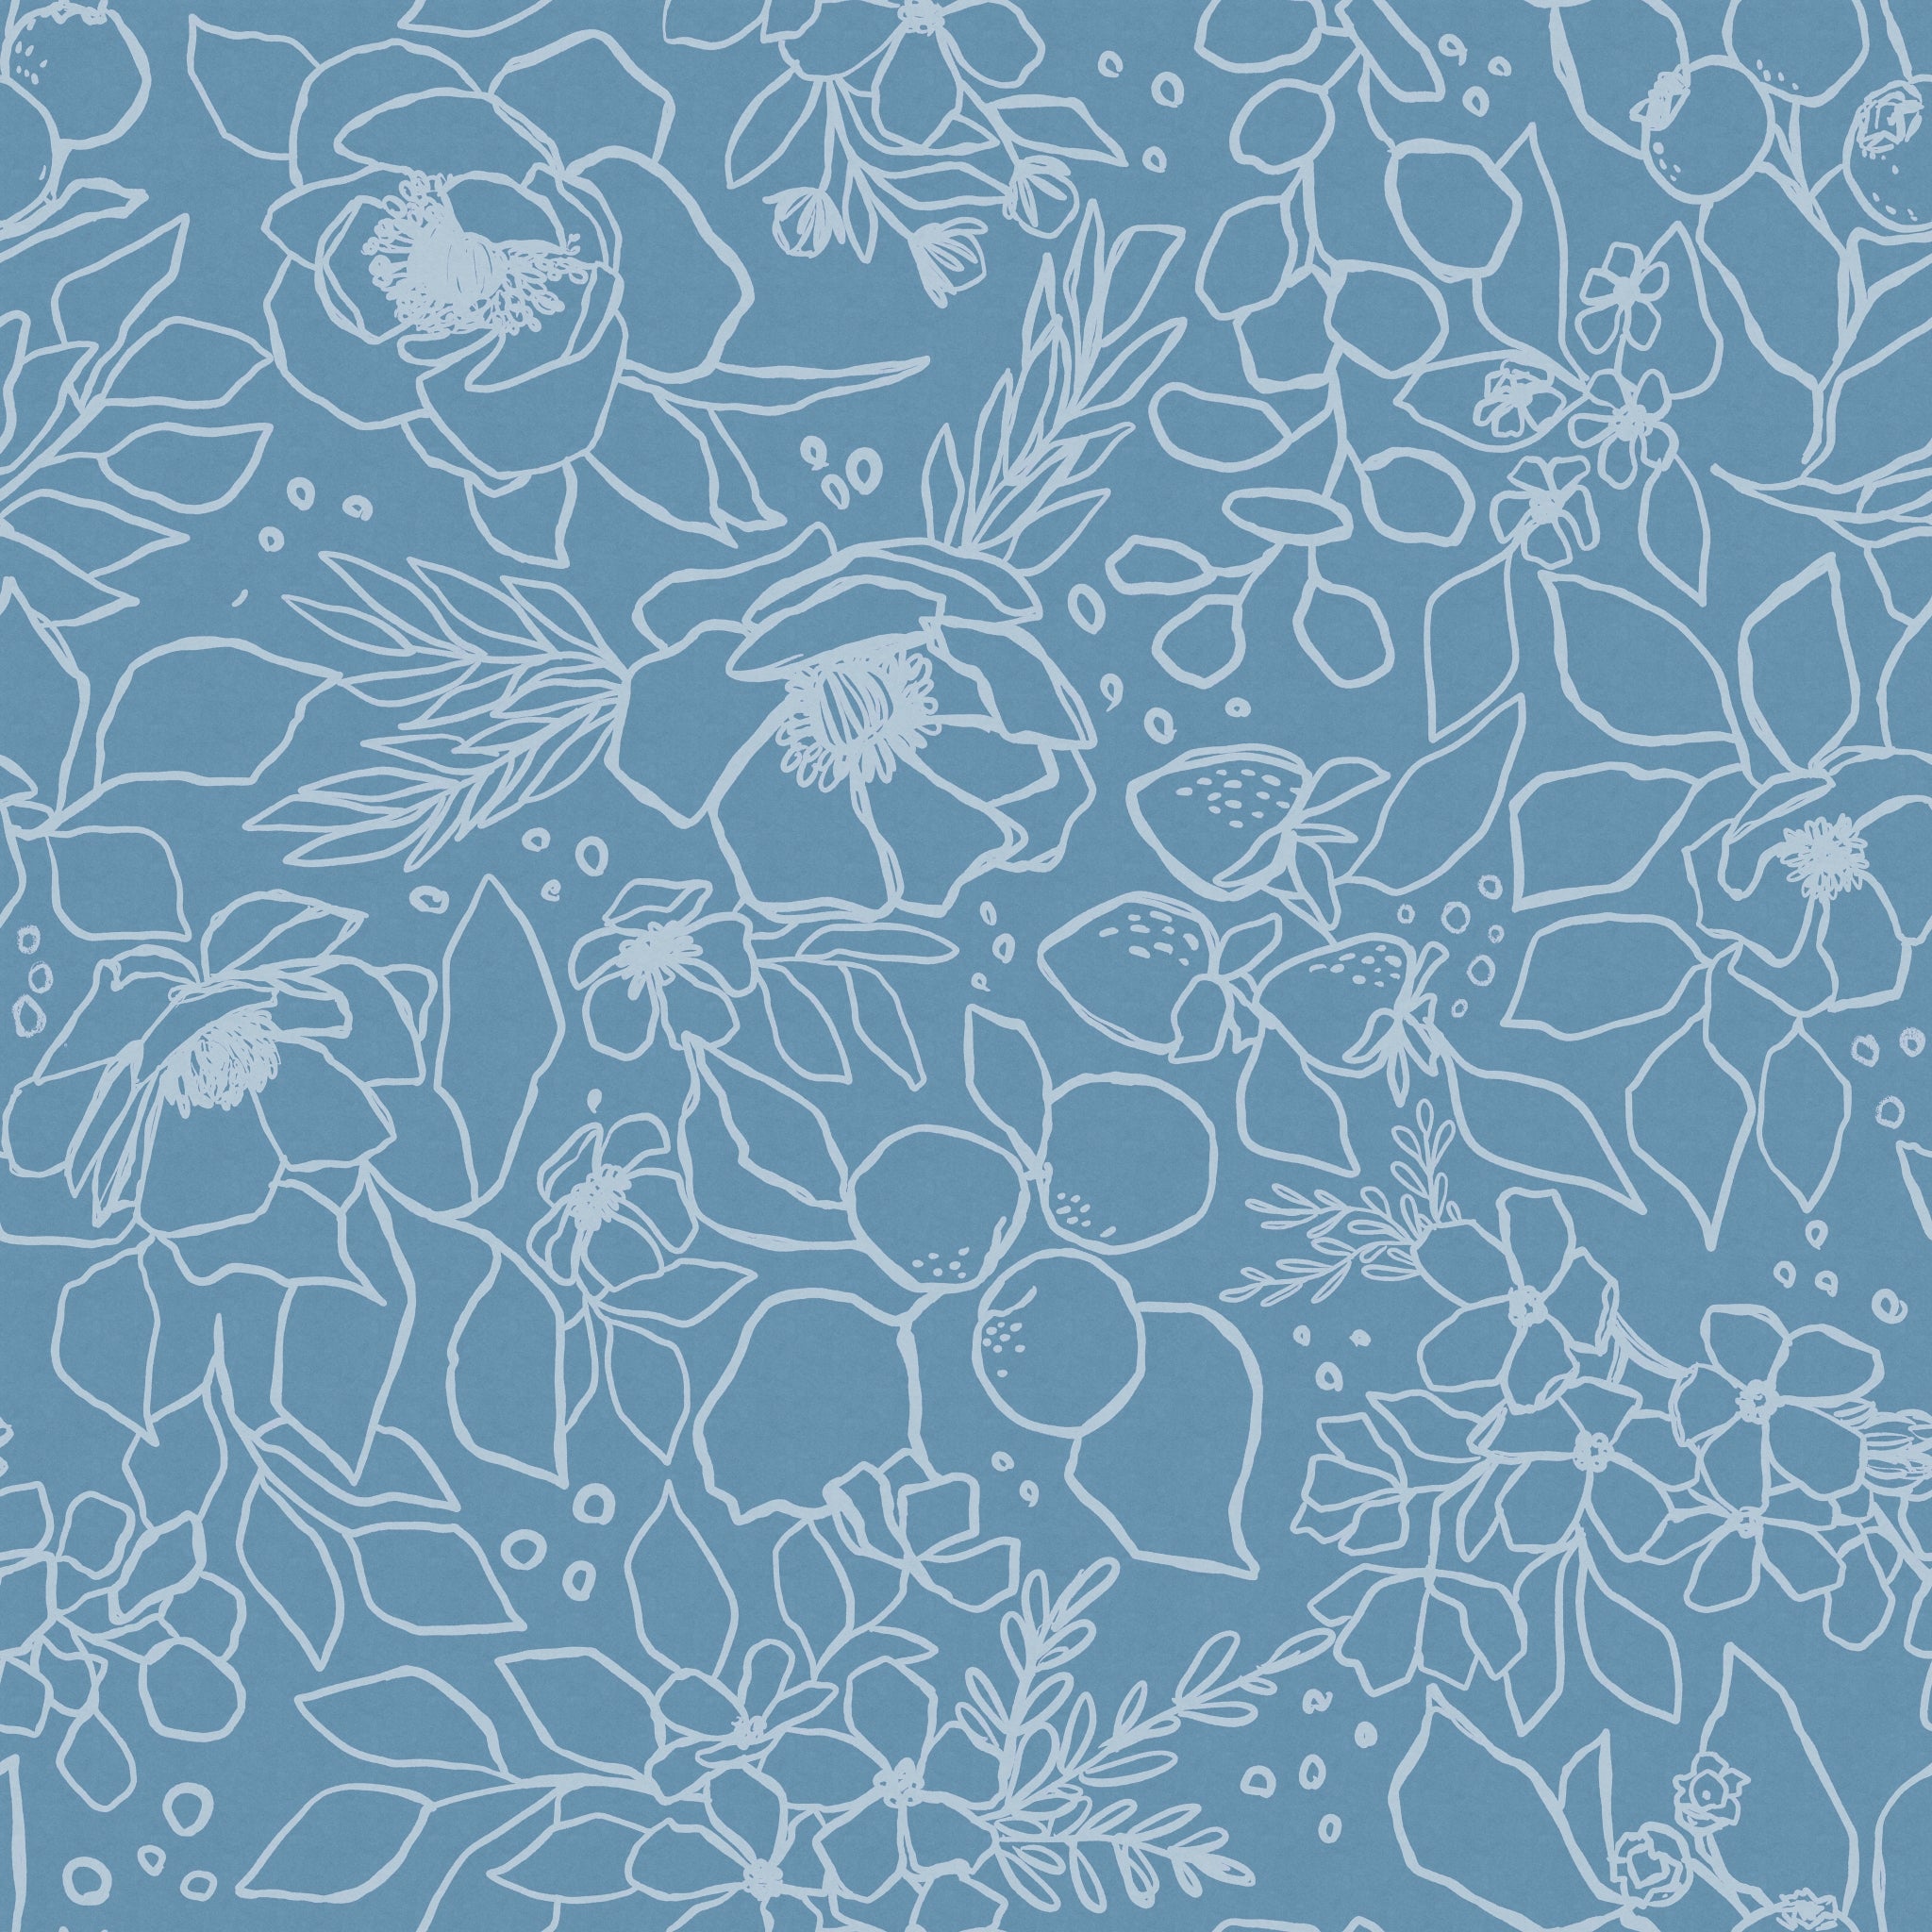 "Wall Blush's Paige (Blue) Wallpaper featuring floral design in a sample room setting, highlighting elegance and style."